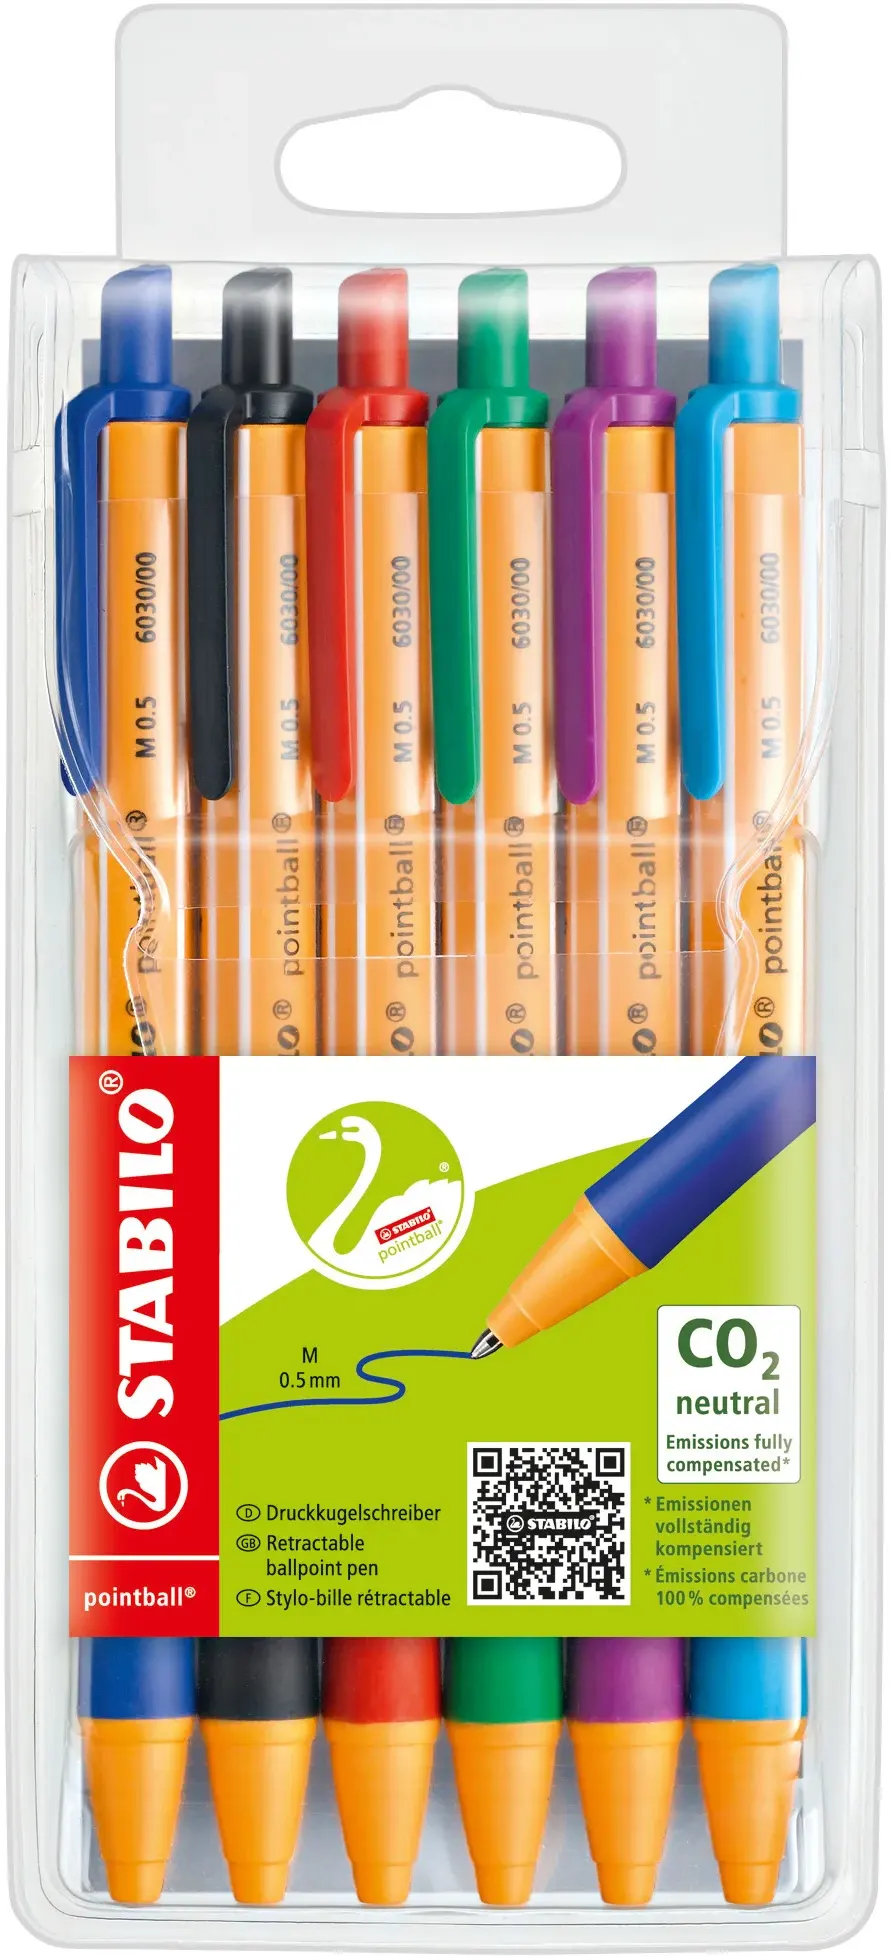 STABILO Stylo à bille pointball 0.5mm 6030/6 6-couleur